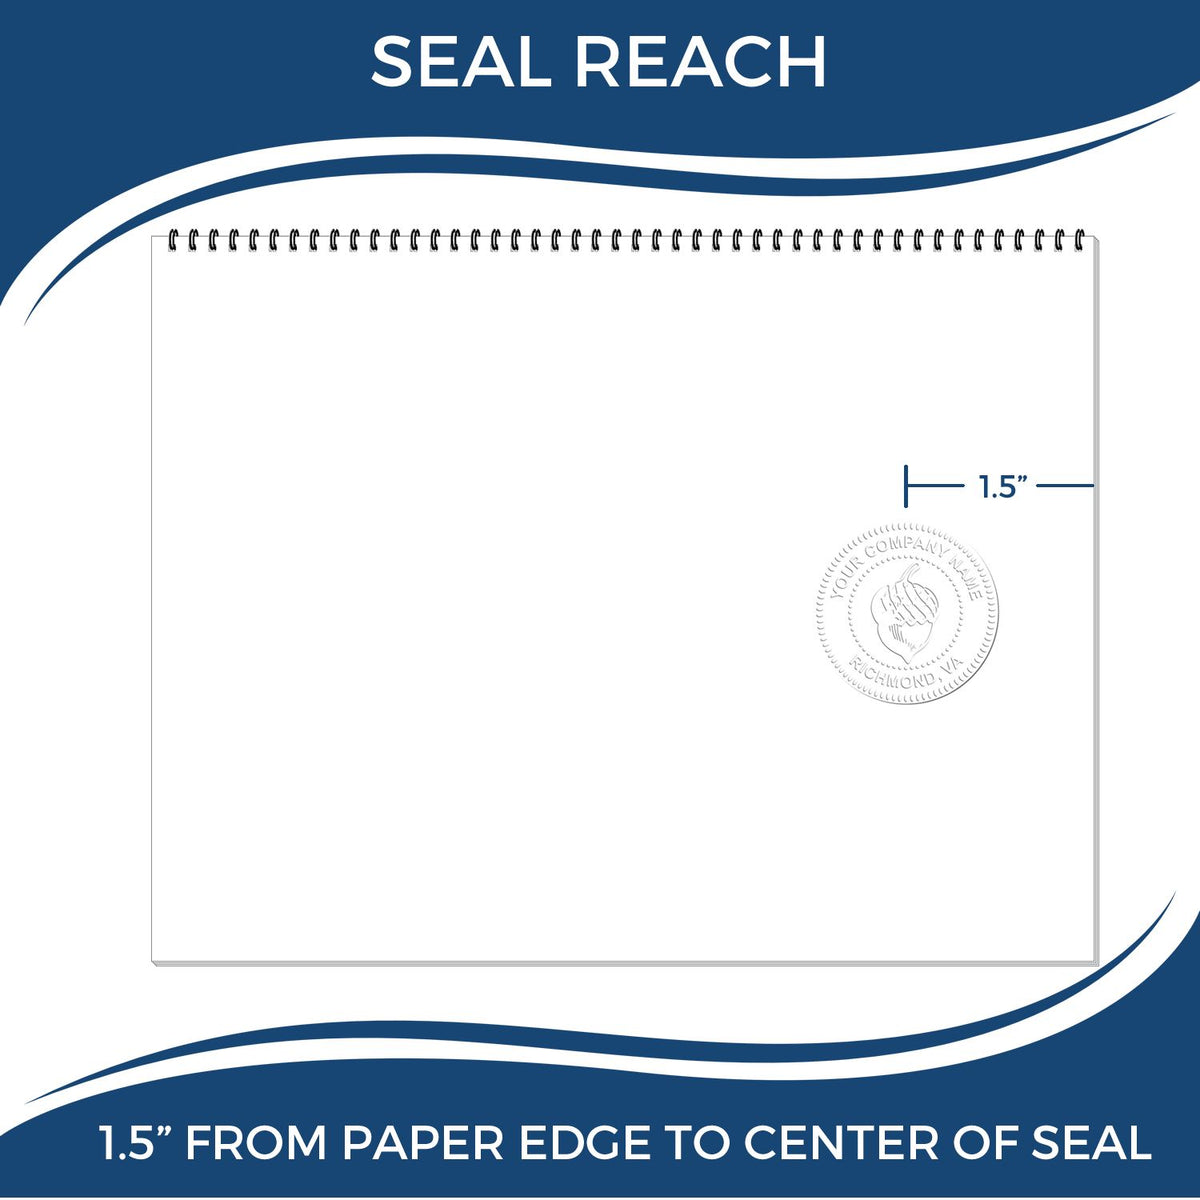 An infographic showing the seal reach which is represented by a ruler and a miniature seal image of the Idaho Engineer Desk Seal